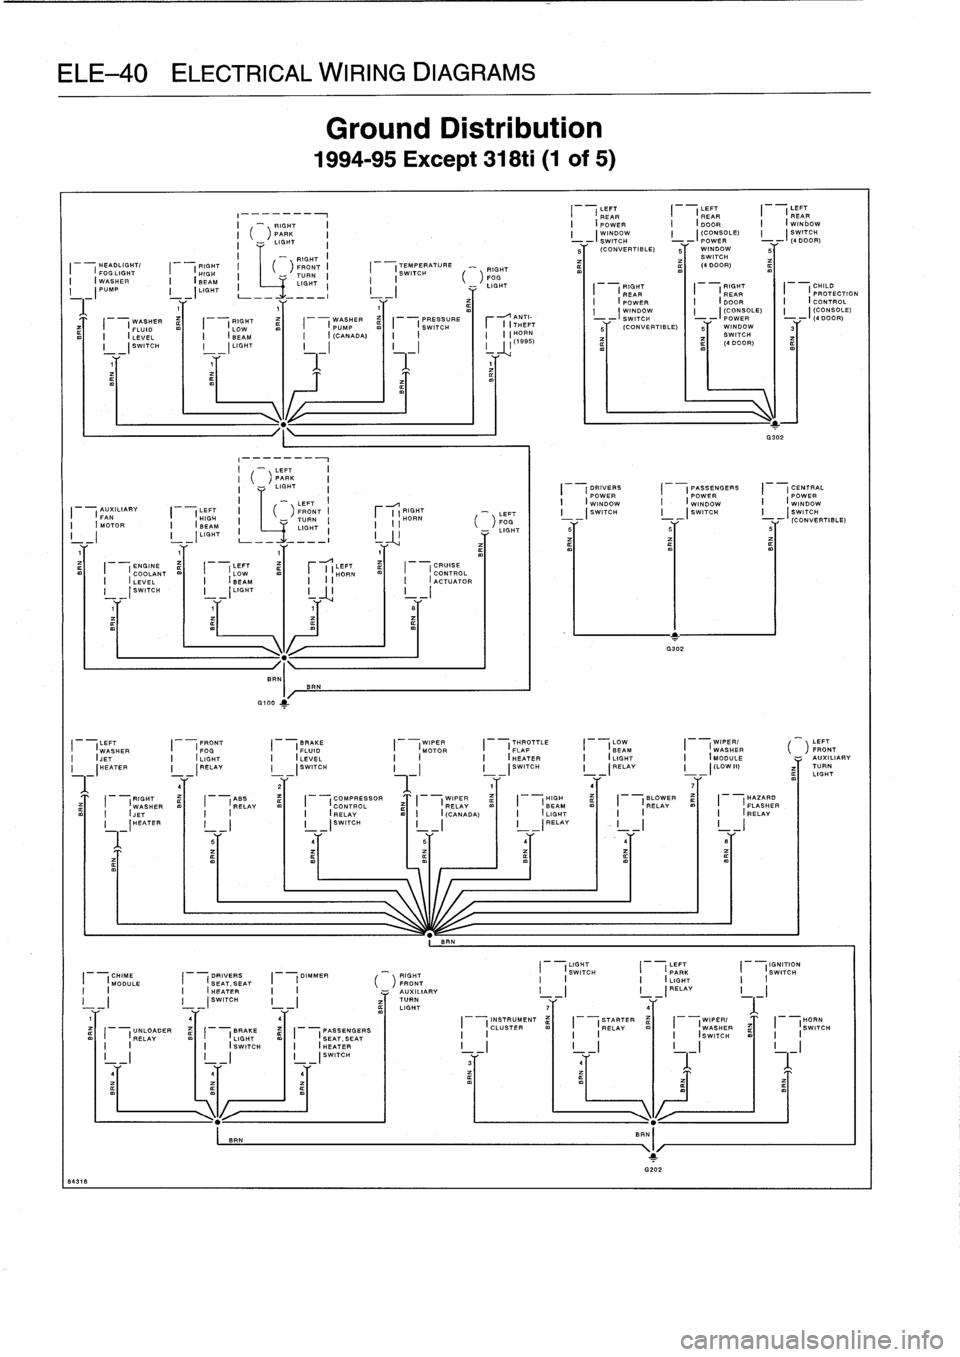 BMW 323i 1997 E36 Workshop Manual 
ELE-40
ELECTRICAL
WIRING
DIAGRAMS

RIGHTHEADLIGHT/

	

RIGHT
I

	

FRONT
I

	

FOG
LIGHT

	

I

	

HIGH

	

I

	

TURN
I

	

I
WASHER

	

I

	

I
BEAM

	

LIGHT
I
(PUMP

	

I
(LIGHT
,
L-
1

	

1

	

